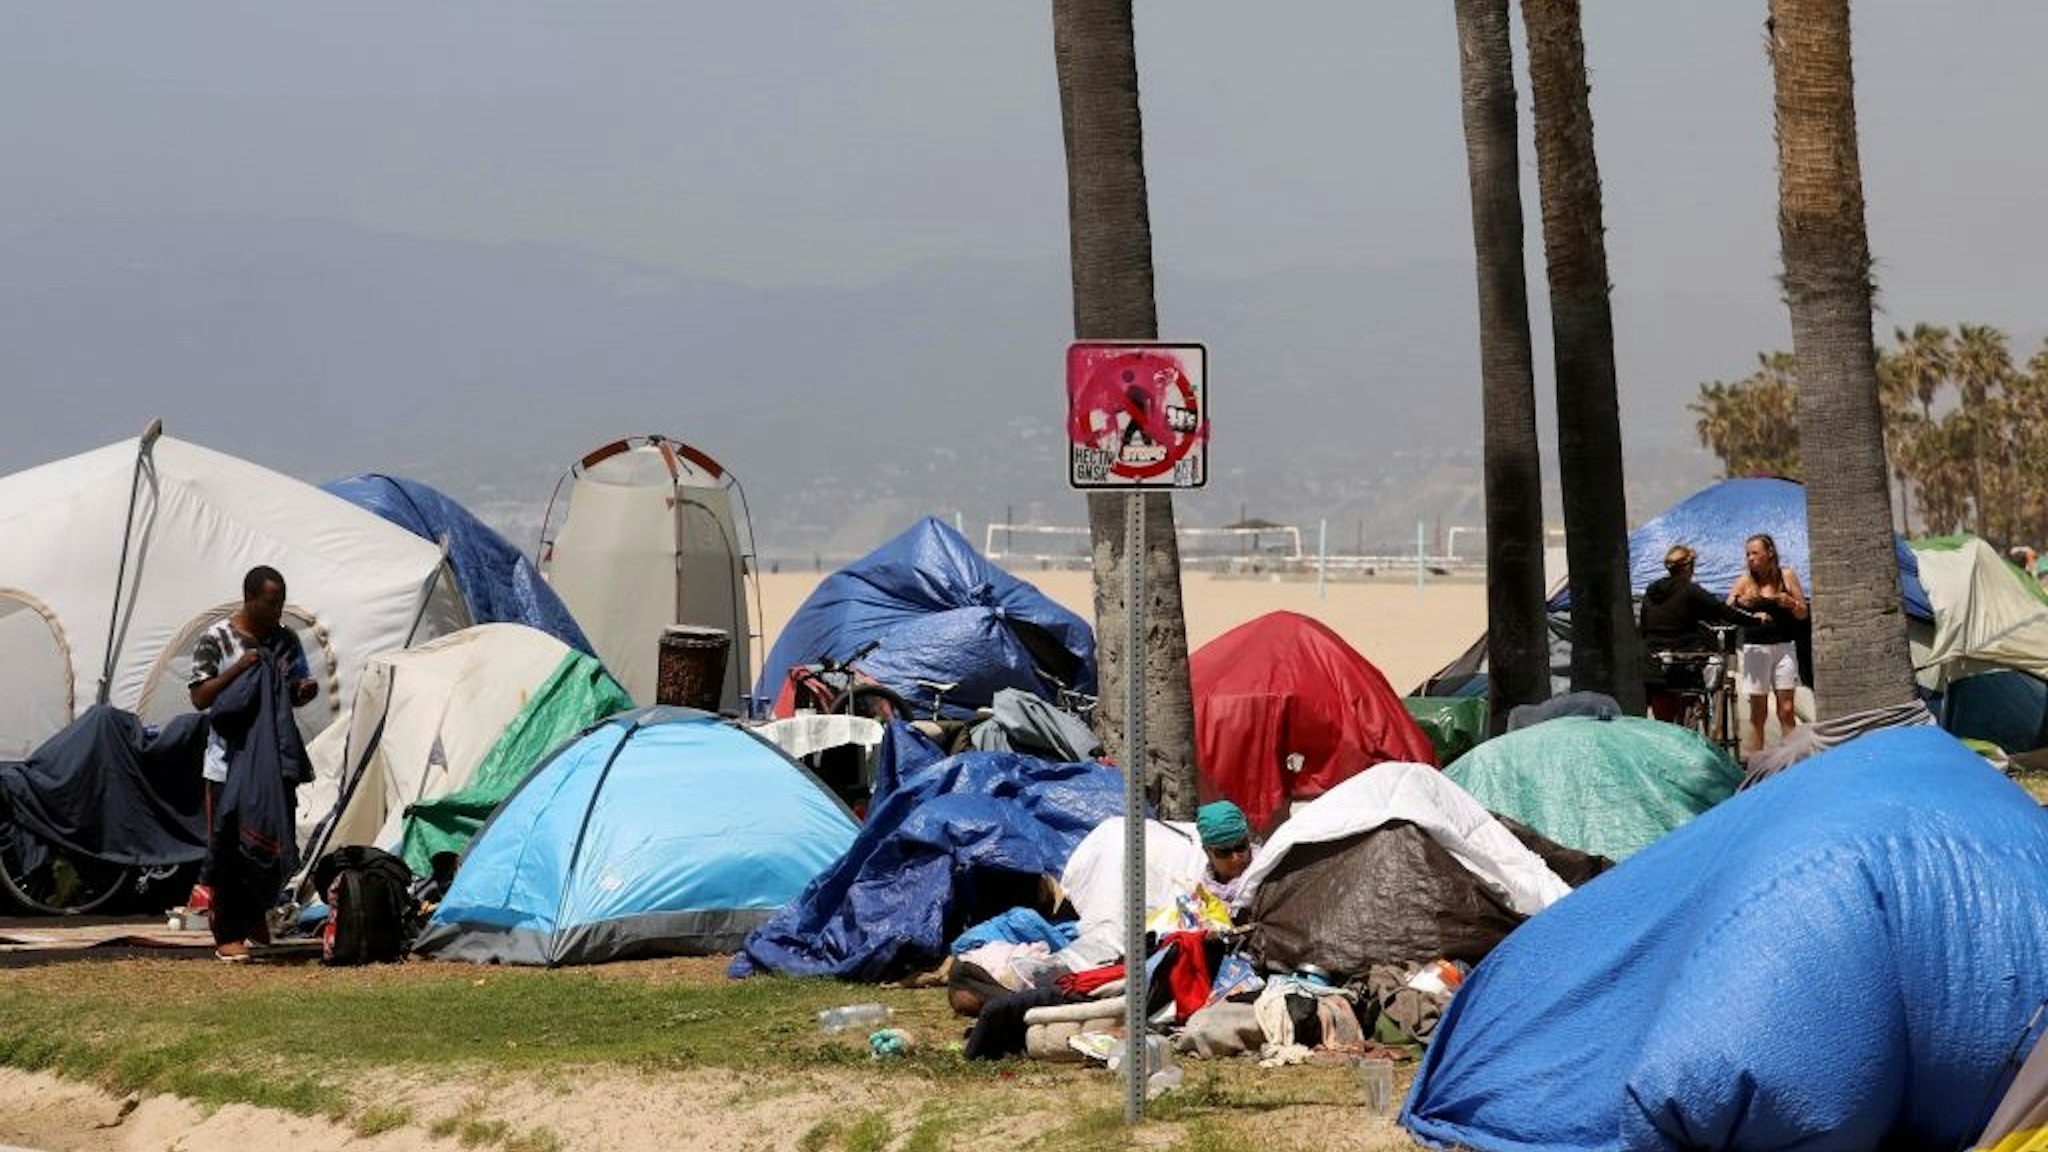 VENICE, CA - APRIL 16, 2021 - - A sea of homeless tents takes over an area between the bike path and Ocean Front Walk in Venice on April 16, 2021.